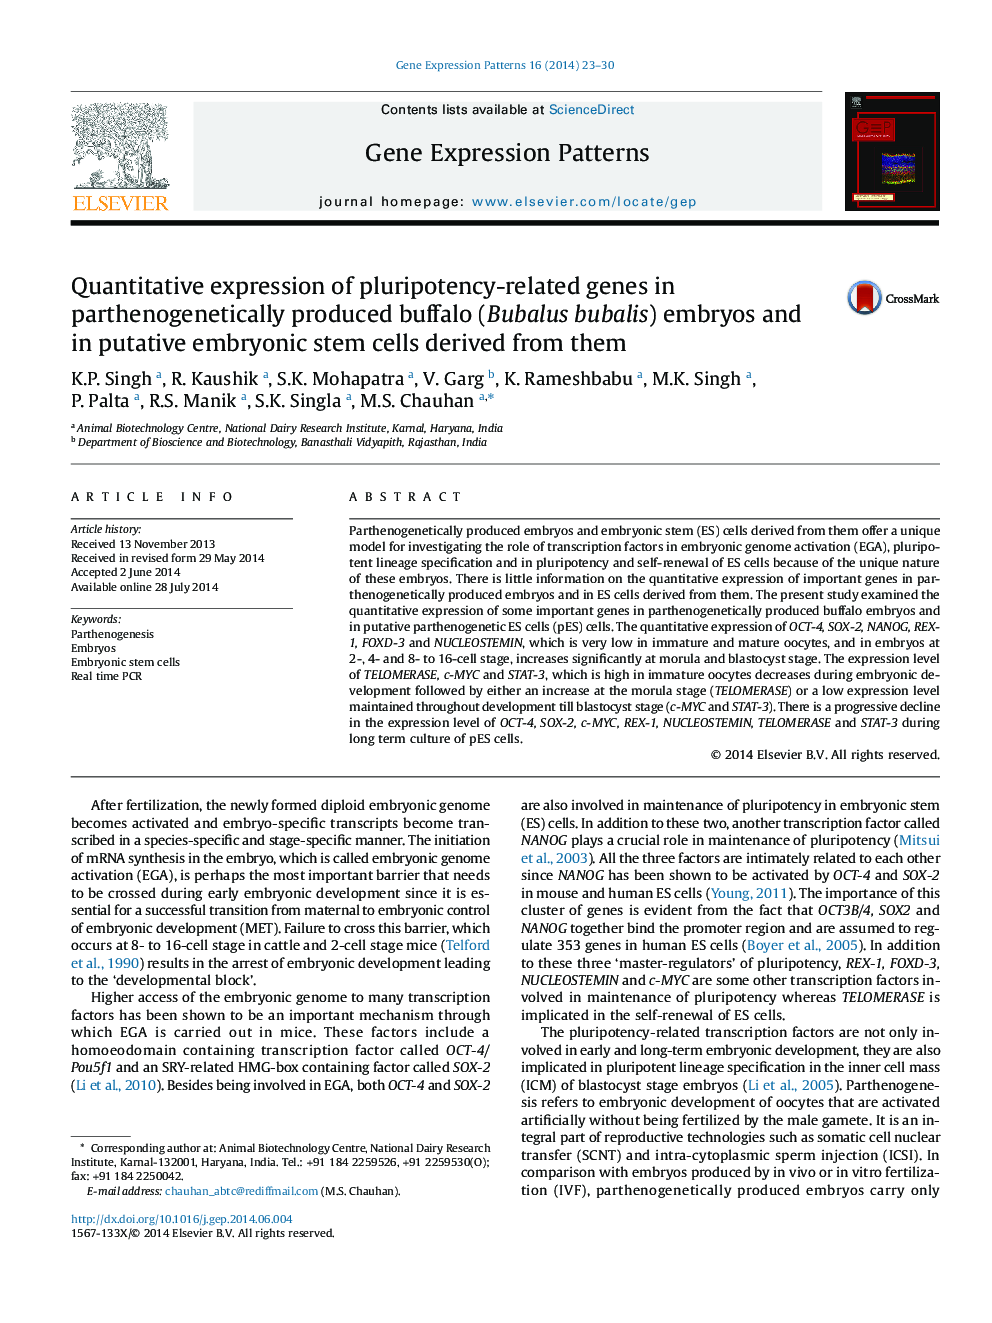 Quantitative expression of pluripotency-related genes in parthenogenetically produced buffalo (Bubalus bubalis) embryos and in putative embryonic stem cells derived from them